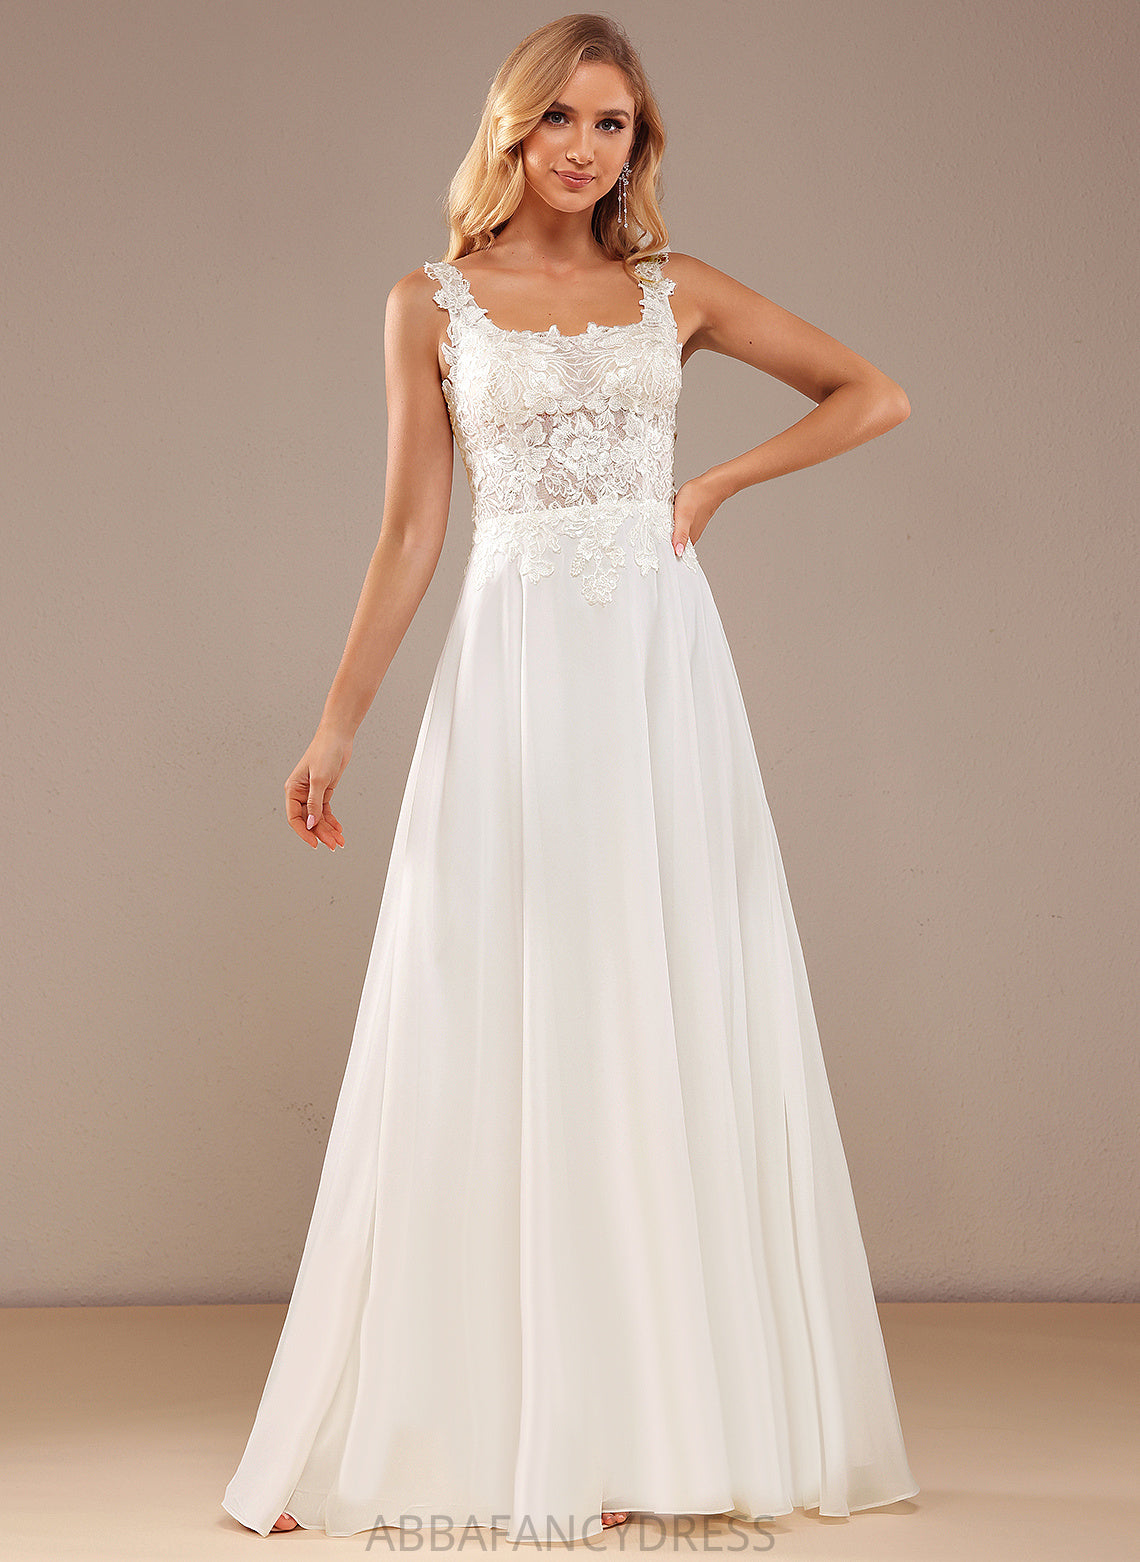 Lace Wedding Sequins A-Line Square With Wedding Dresses Dress Floor-Length Chiffon Azul